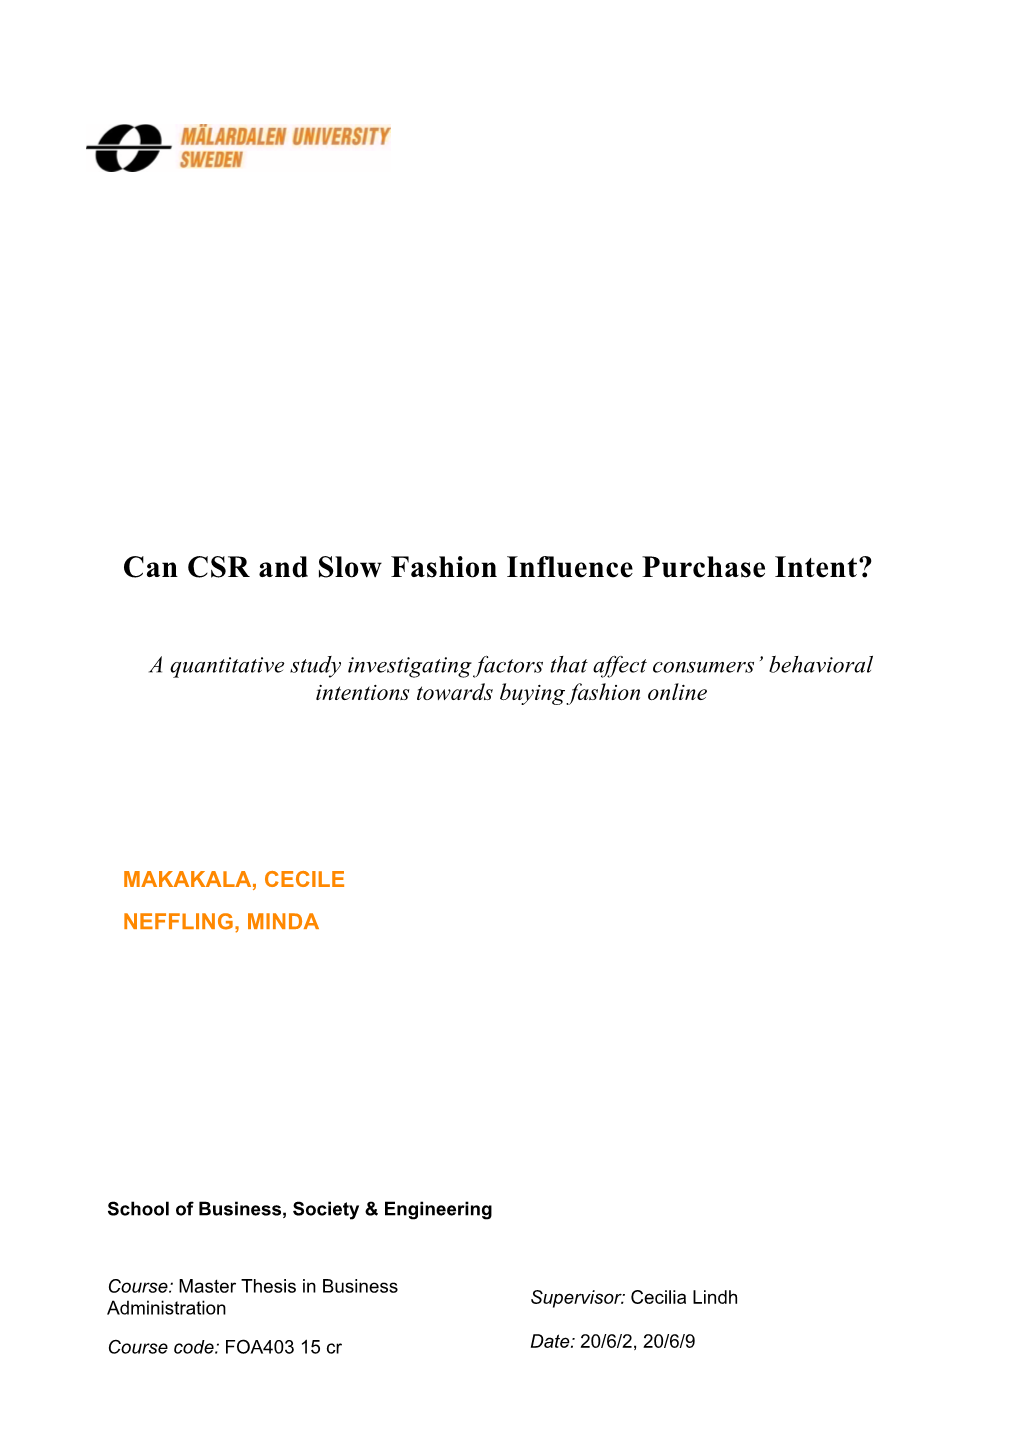 Can CSR and Slow Fashion Influence Purchase Intent?